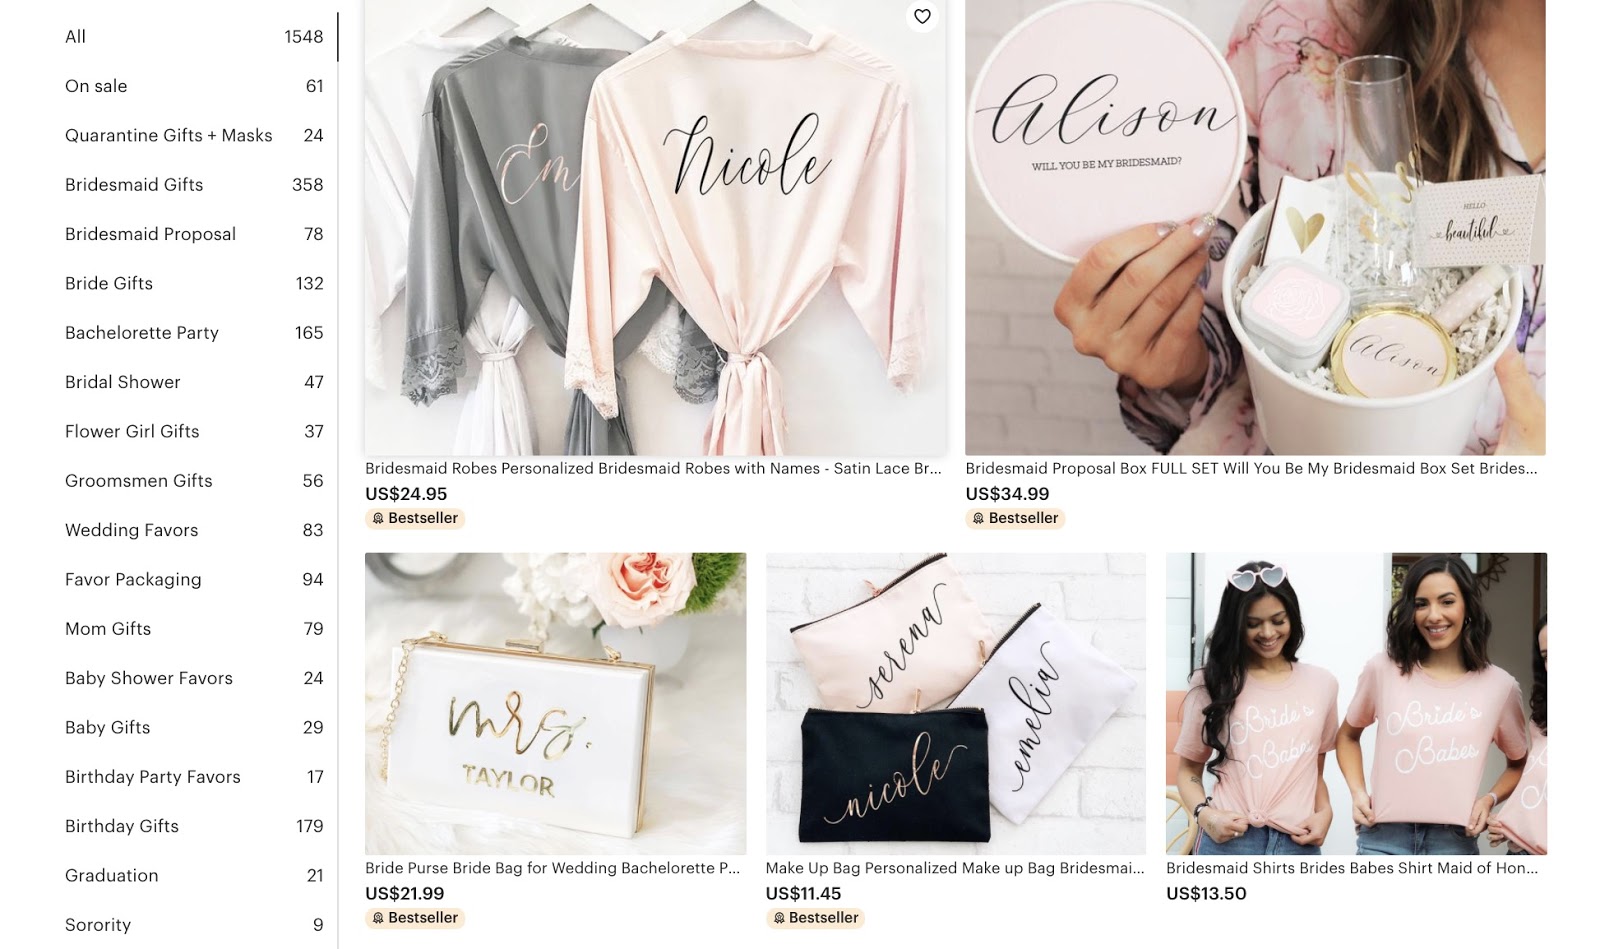 Selling Bridesmaid Gifts on Etsy